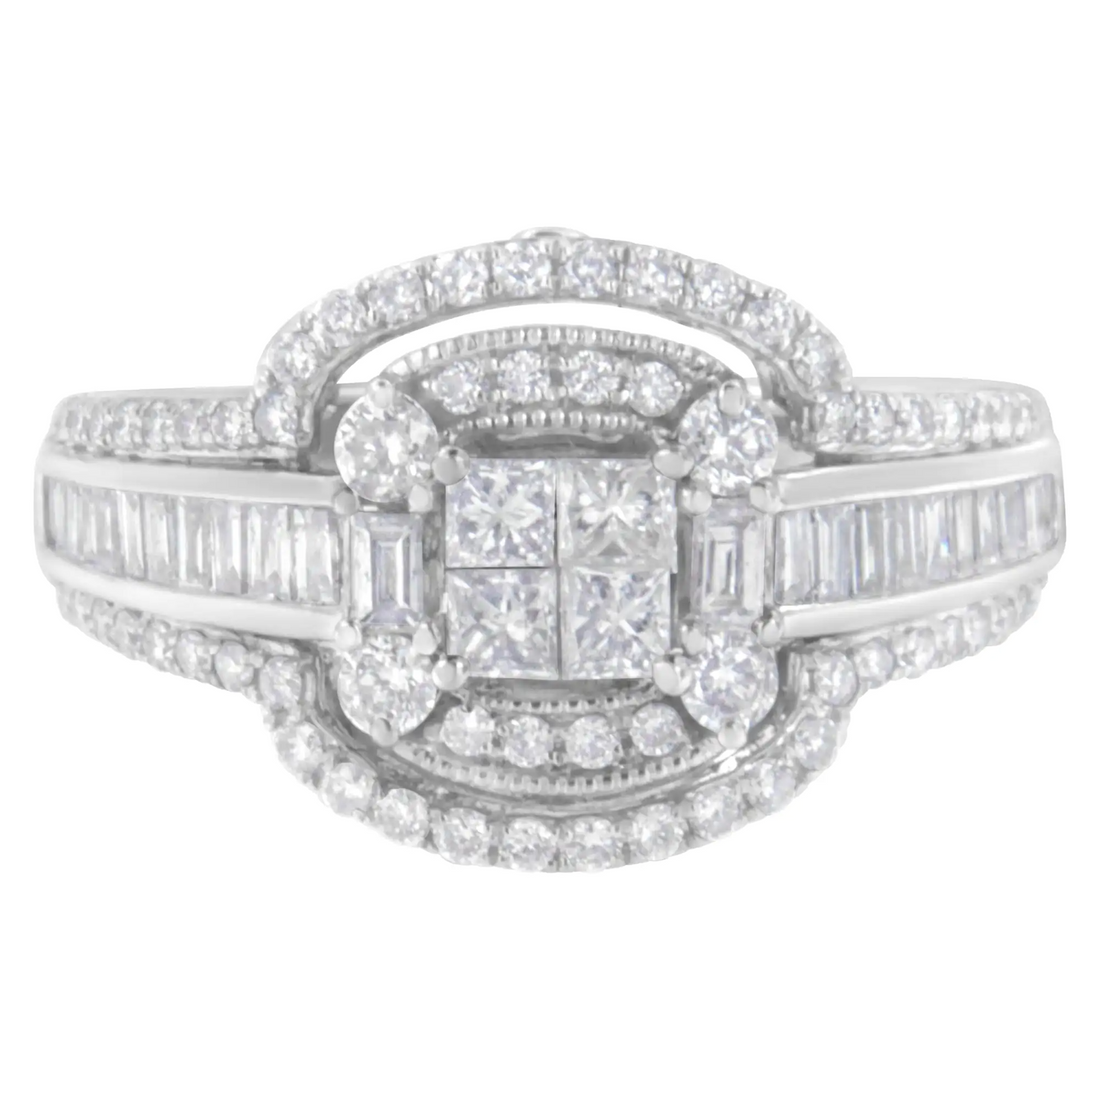 14KT White Gold Diamond Cocktail Ring (1 1/4 cttw, H-I Color, SI2-I1 Clarity)